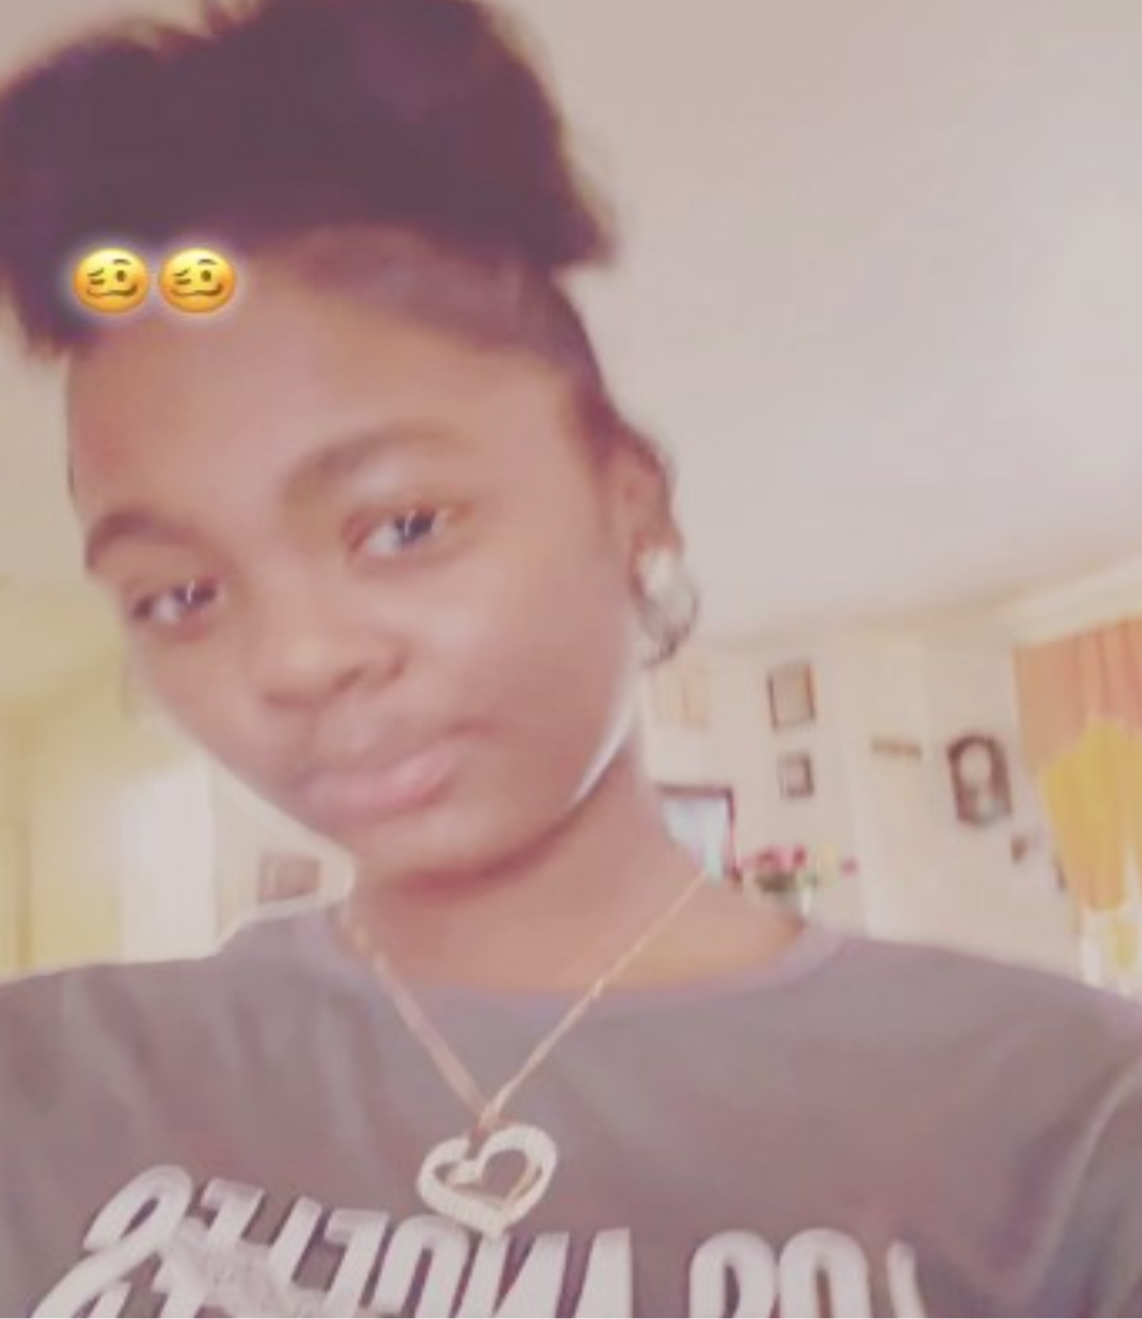 Philadelphia Police Request Help Locating Missing 13-Year-Old